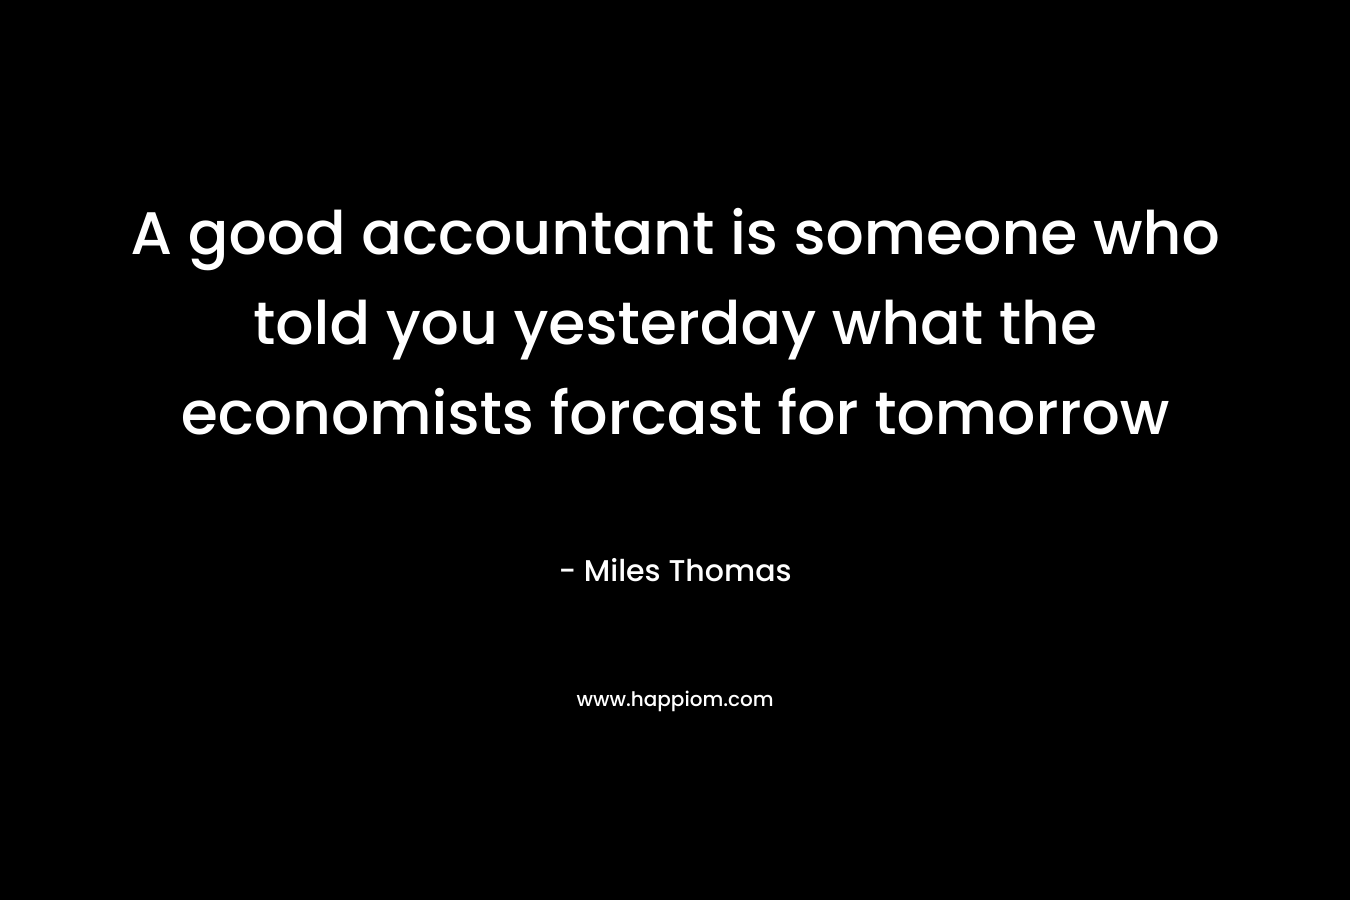 A good accountant is someone who told you yesterday what the economists forcast for tomorrow